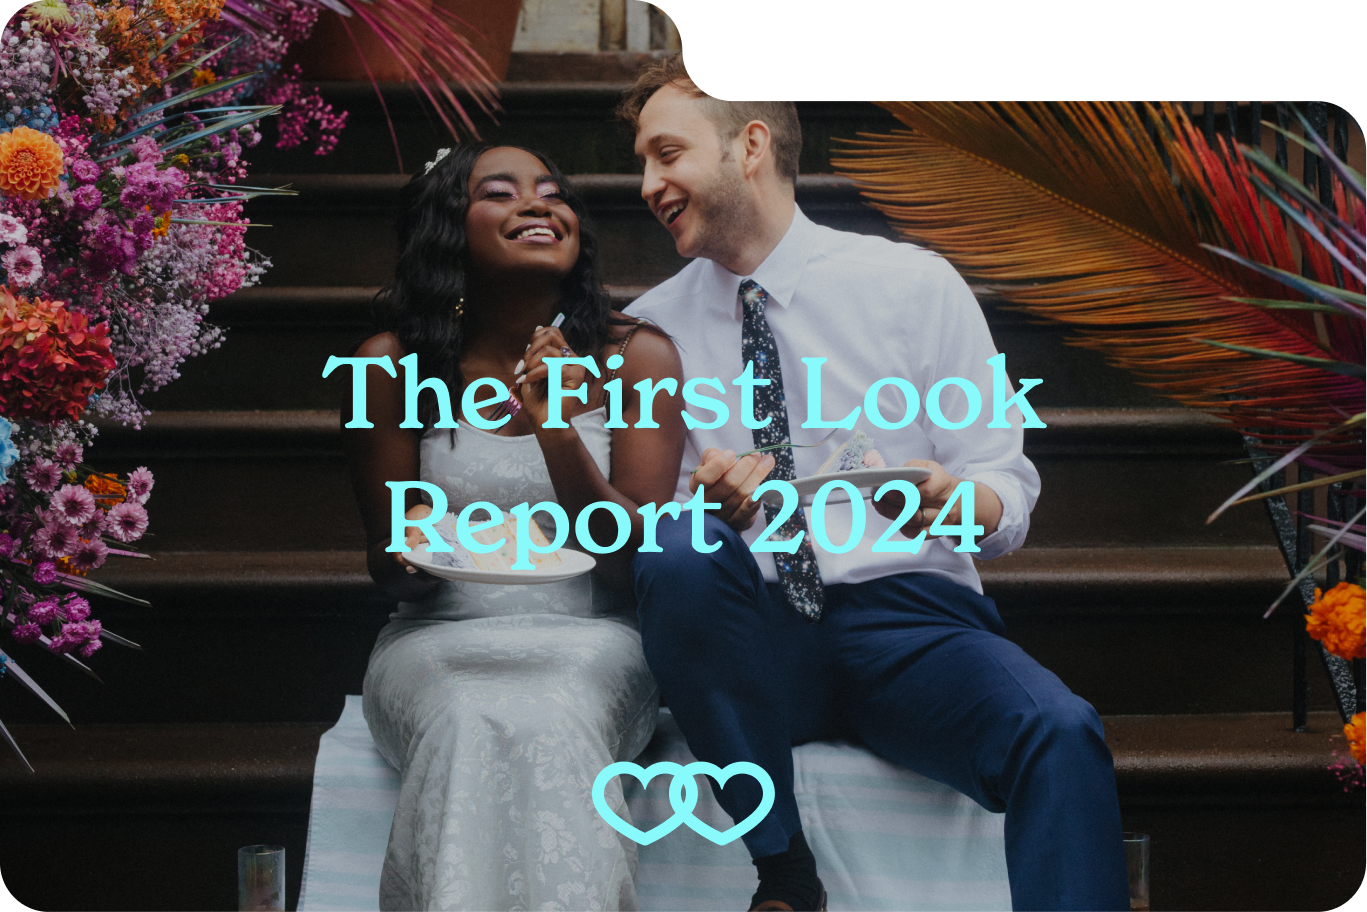 Couple sitting on steps in wedding attire, with text "The First Look Report 2024"